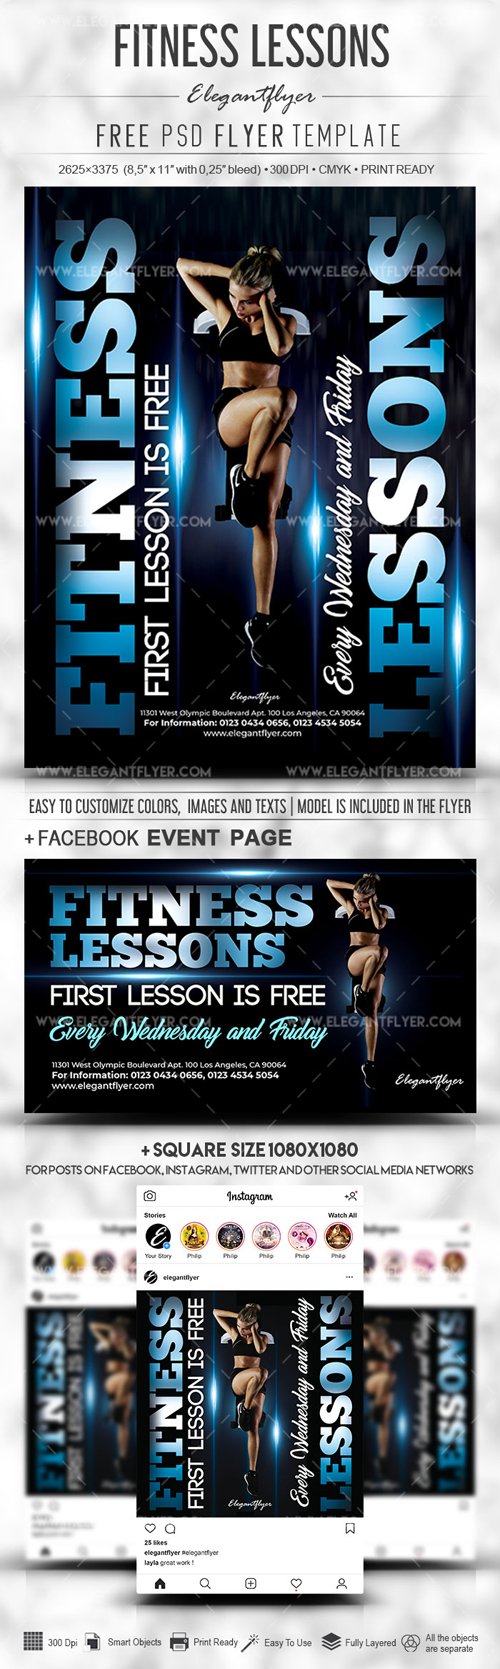 Fitness Lessons – Free PSD Flyer Template + Facebook Cover + Instagram Post